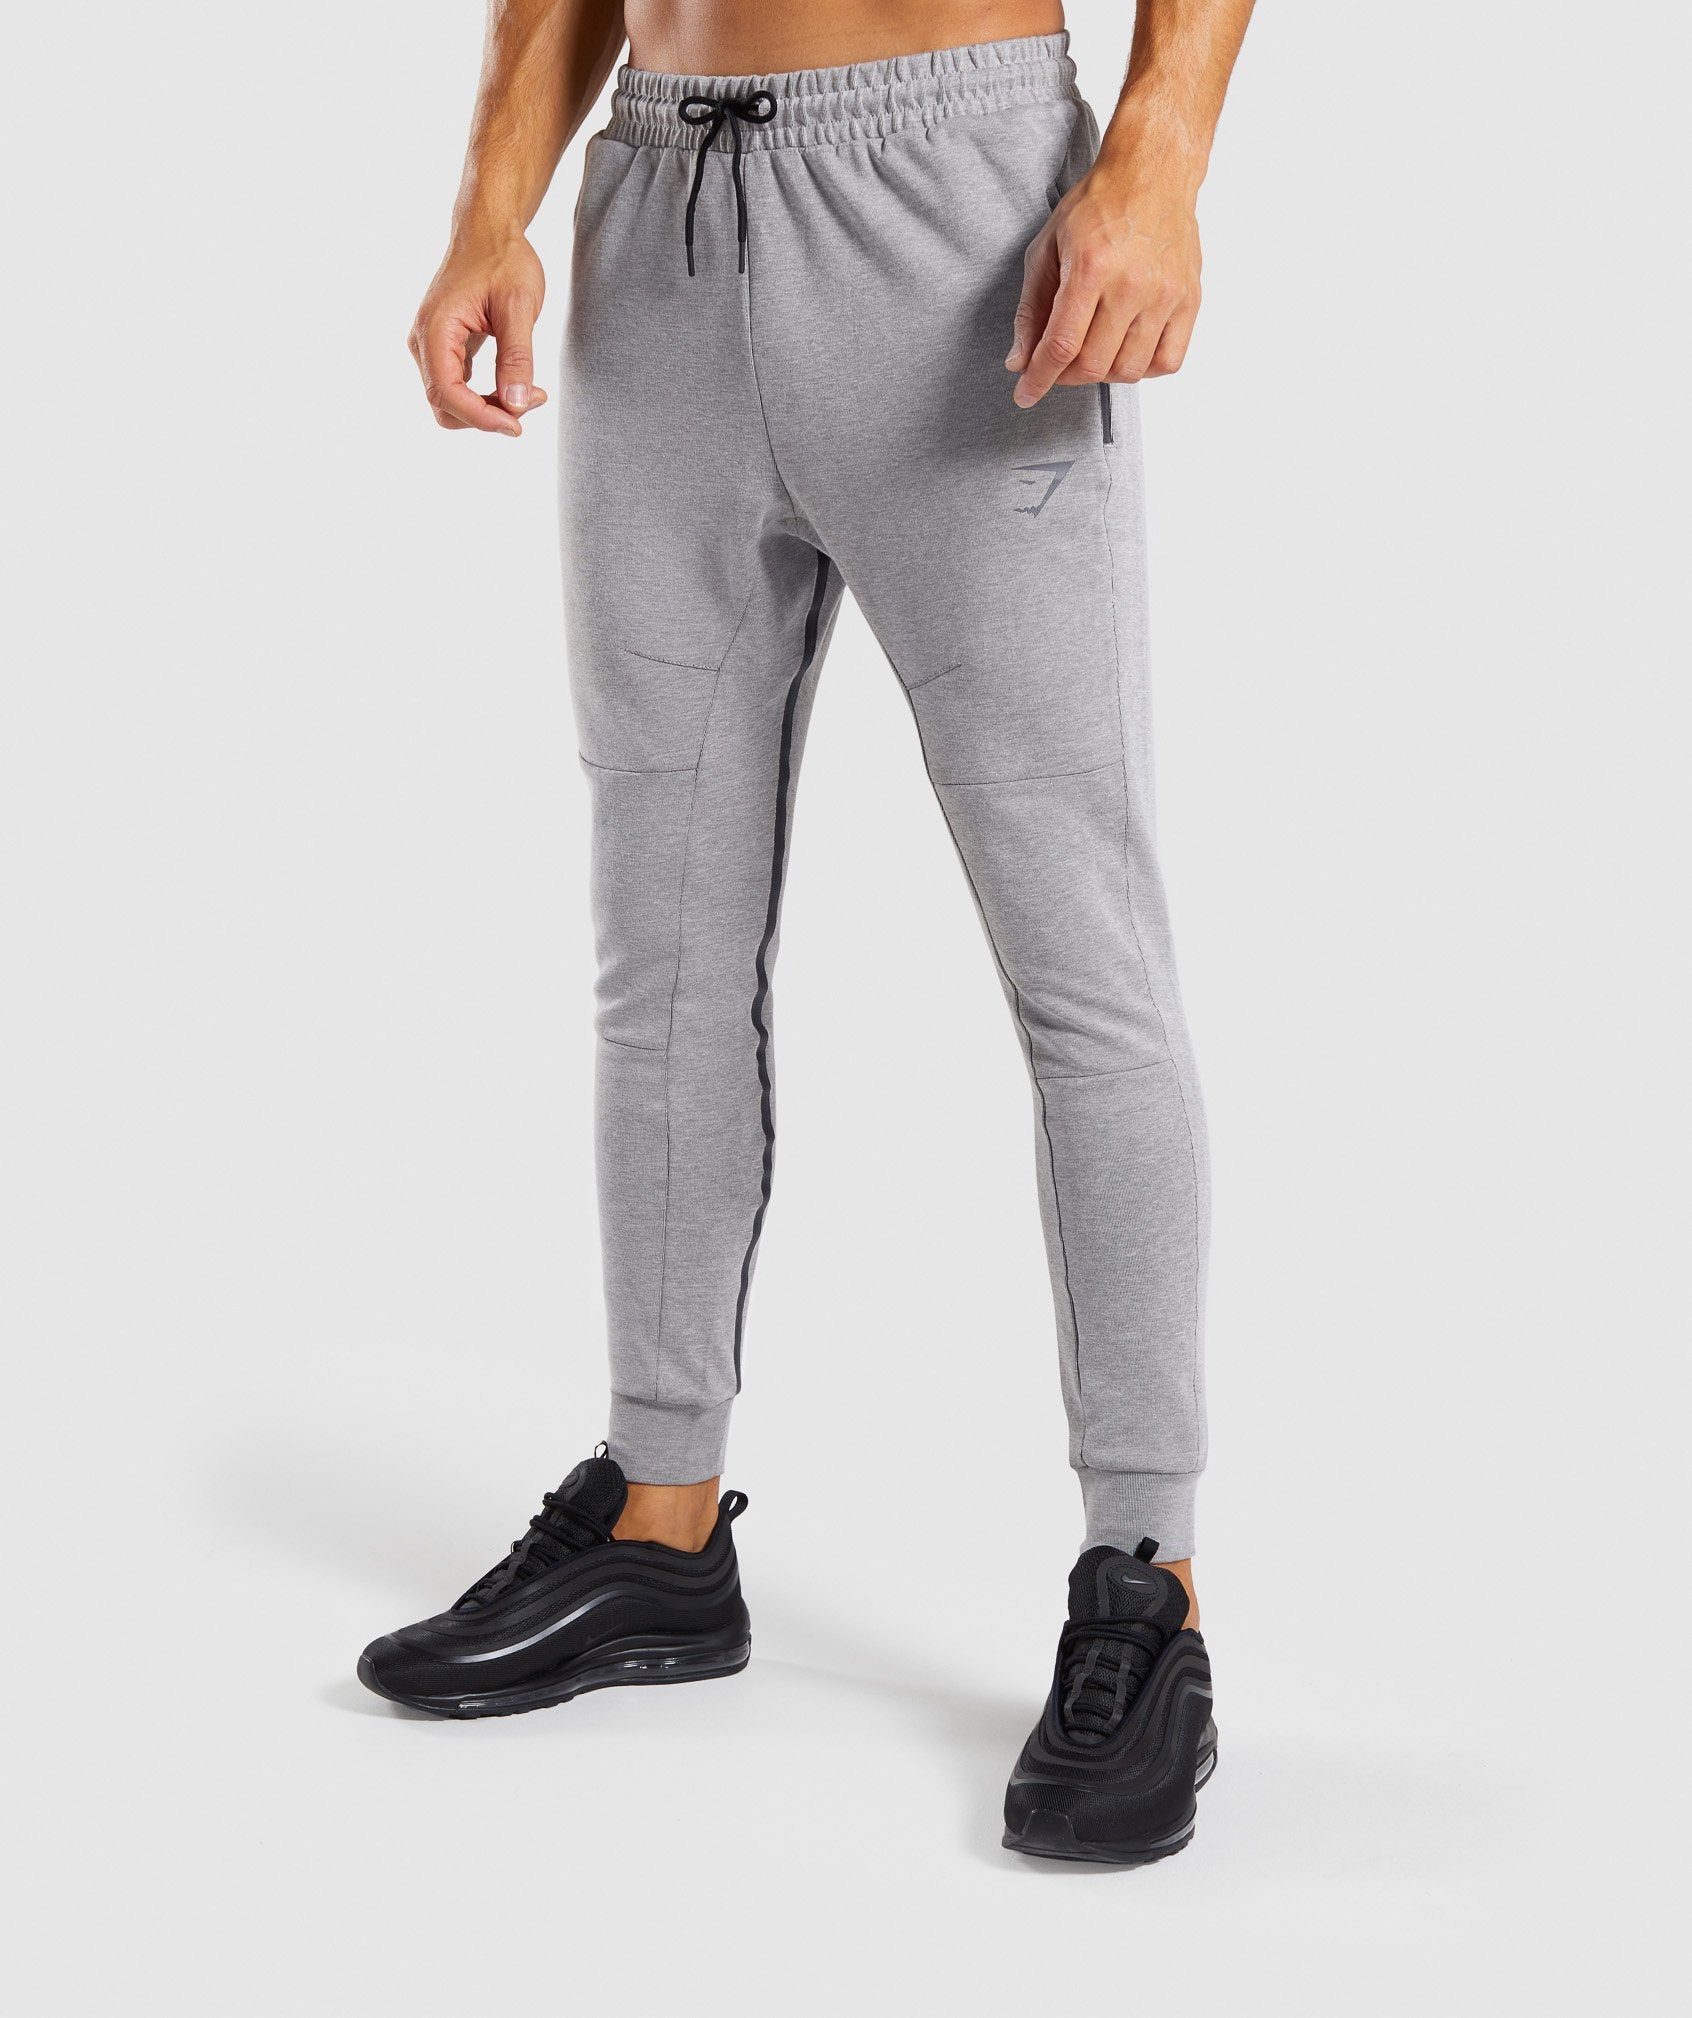 Take Over Bottoms in Light Grey Marl - view 1